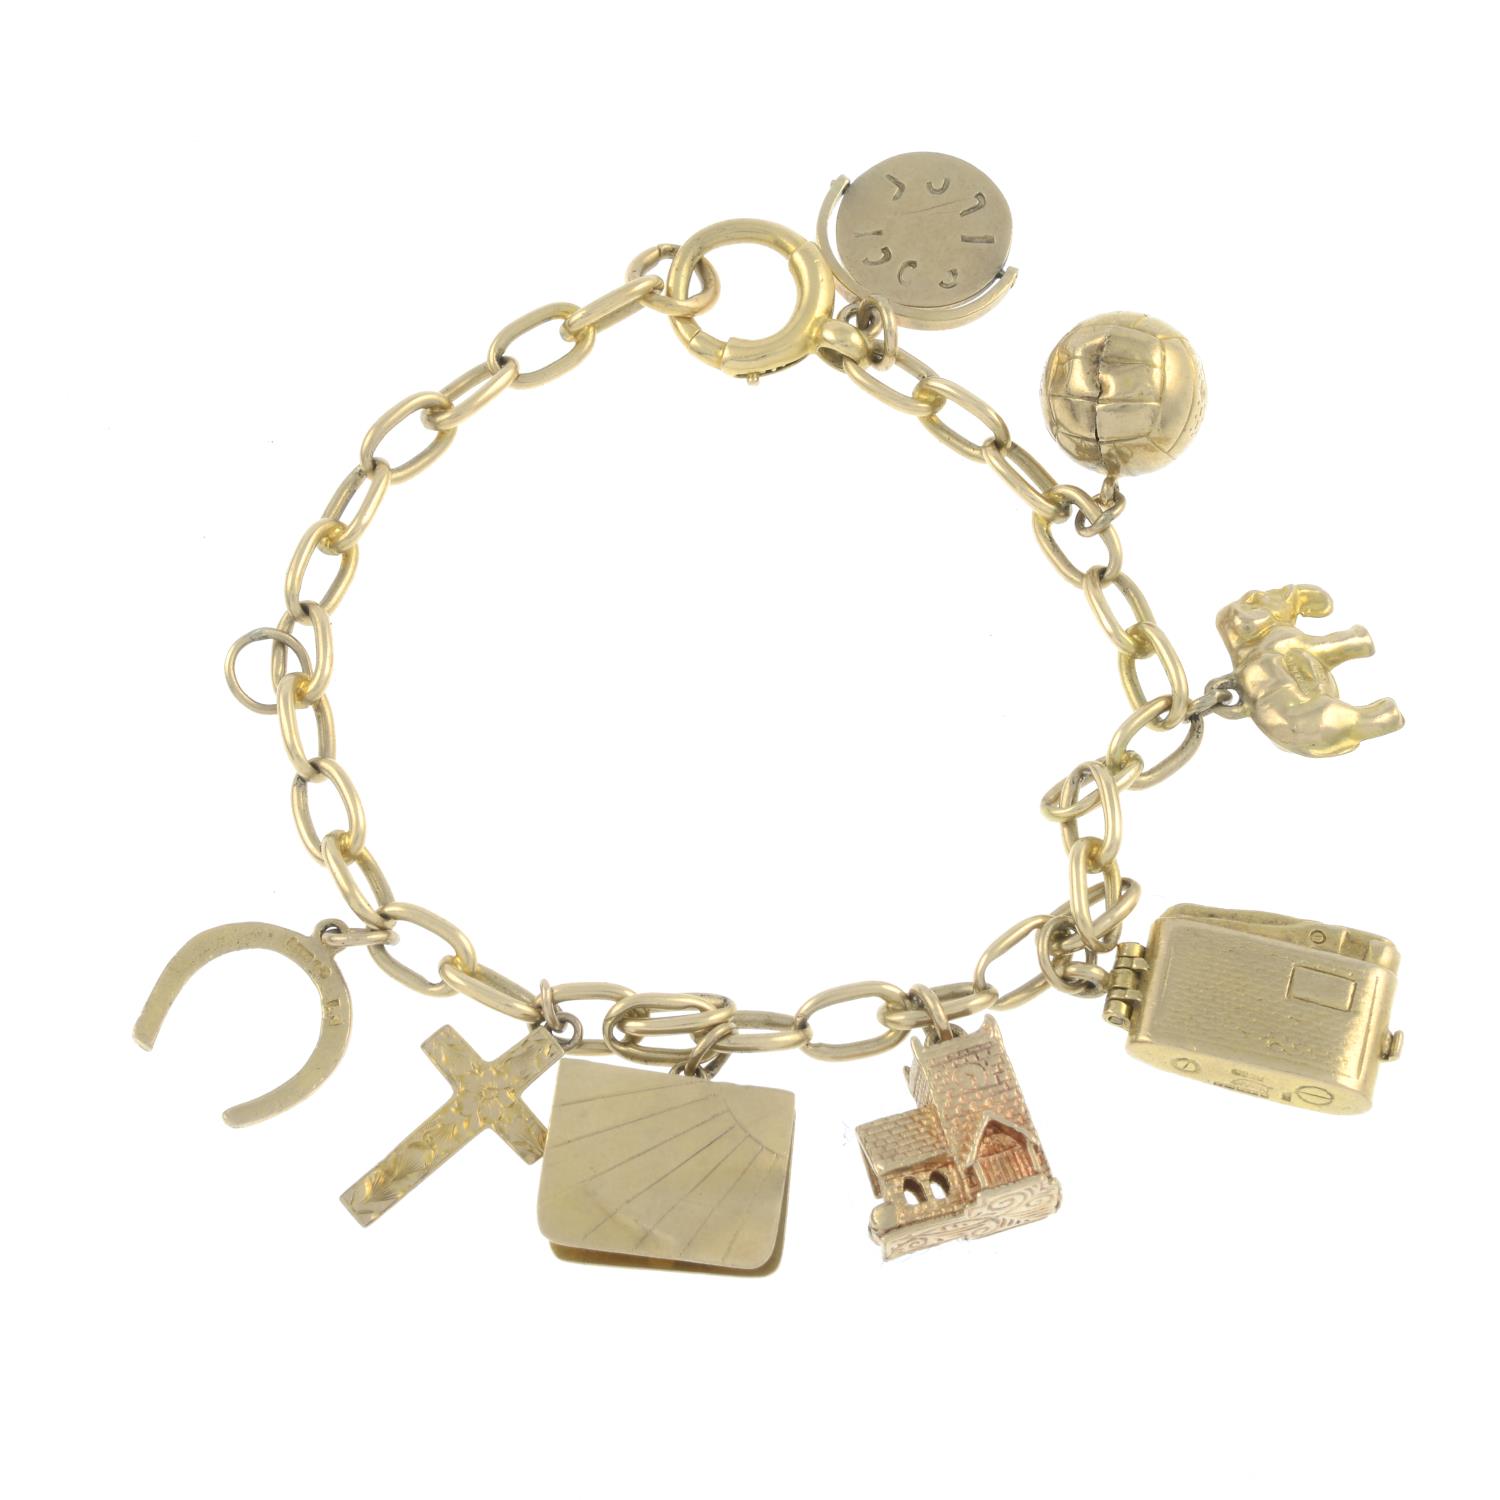 An 18ct gold bracelet, suspending eight 9ct gold charms.Bracelet with hallmarks for 18ct gold.